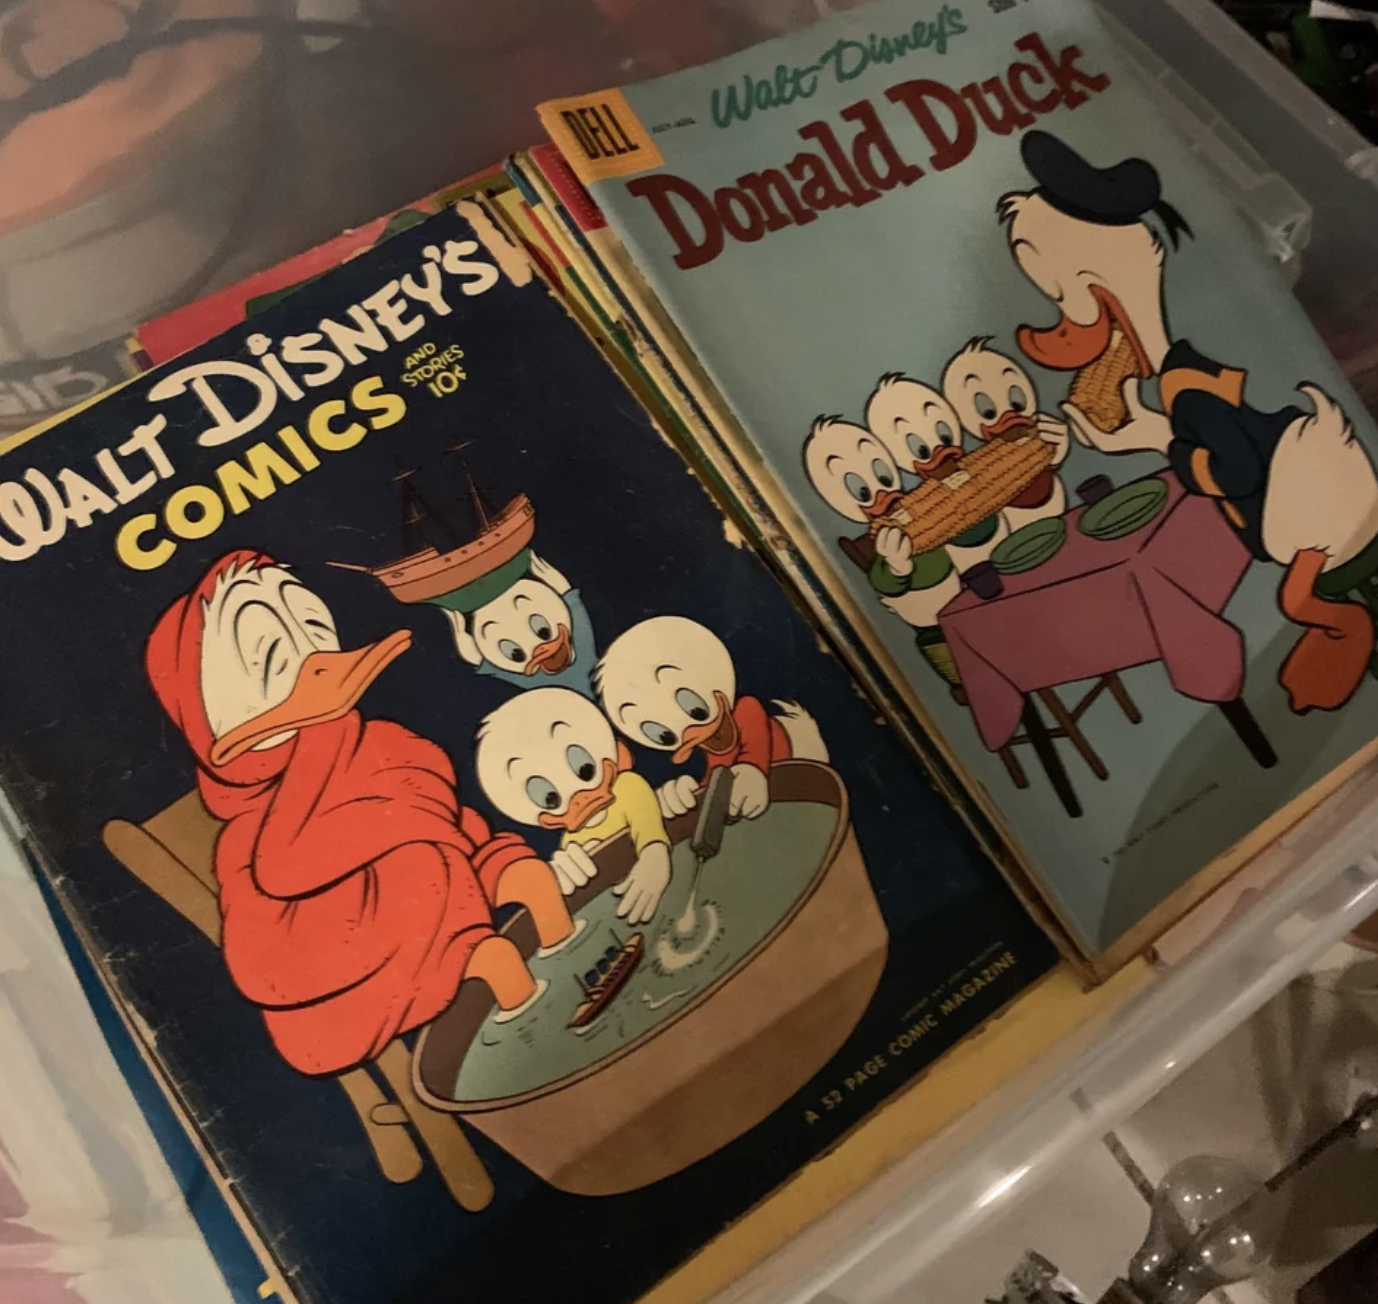 Two stacks of Disney comic books are being shown